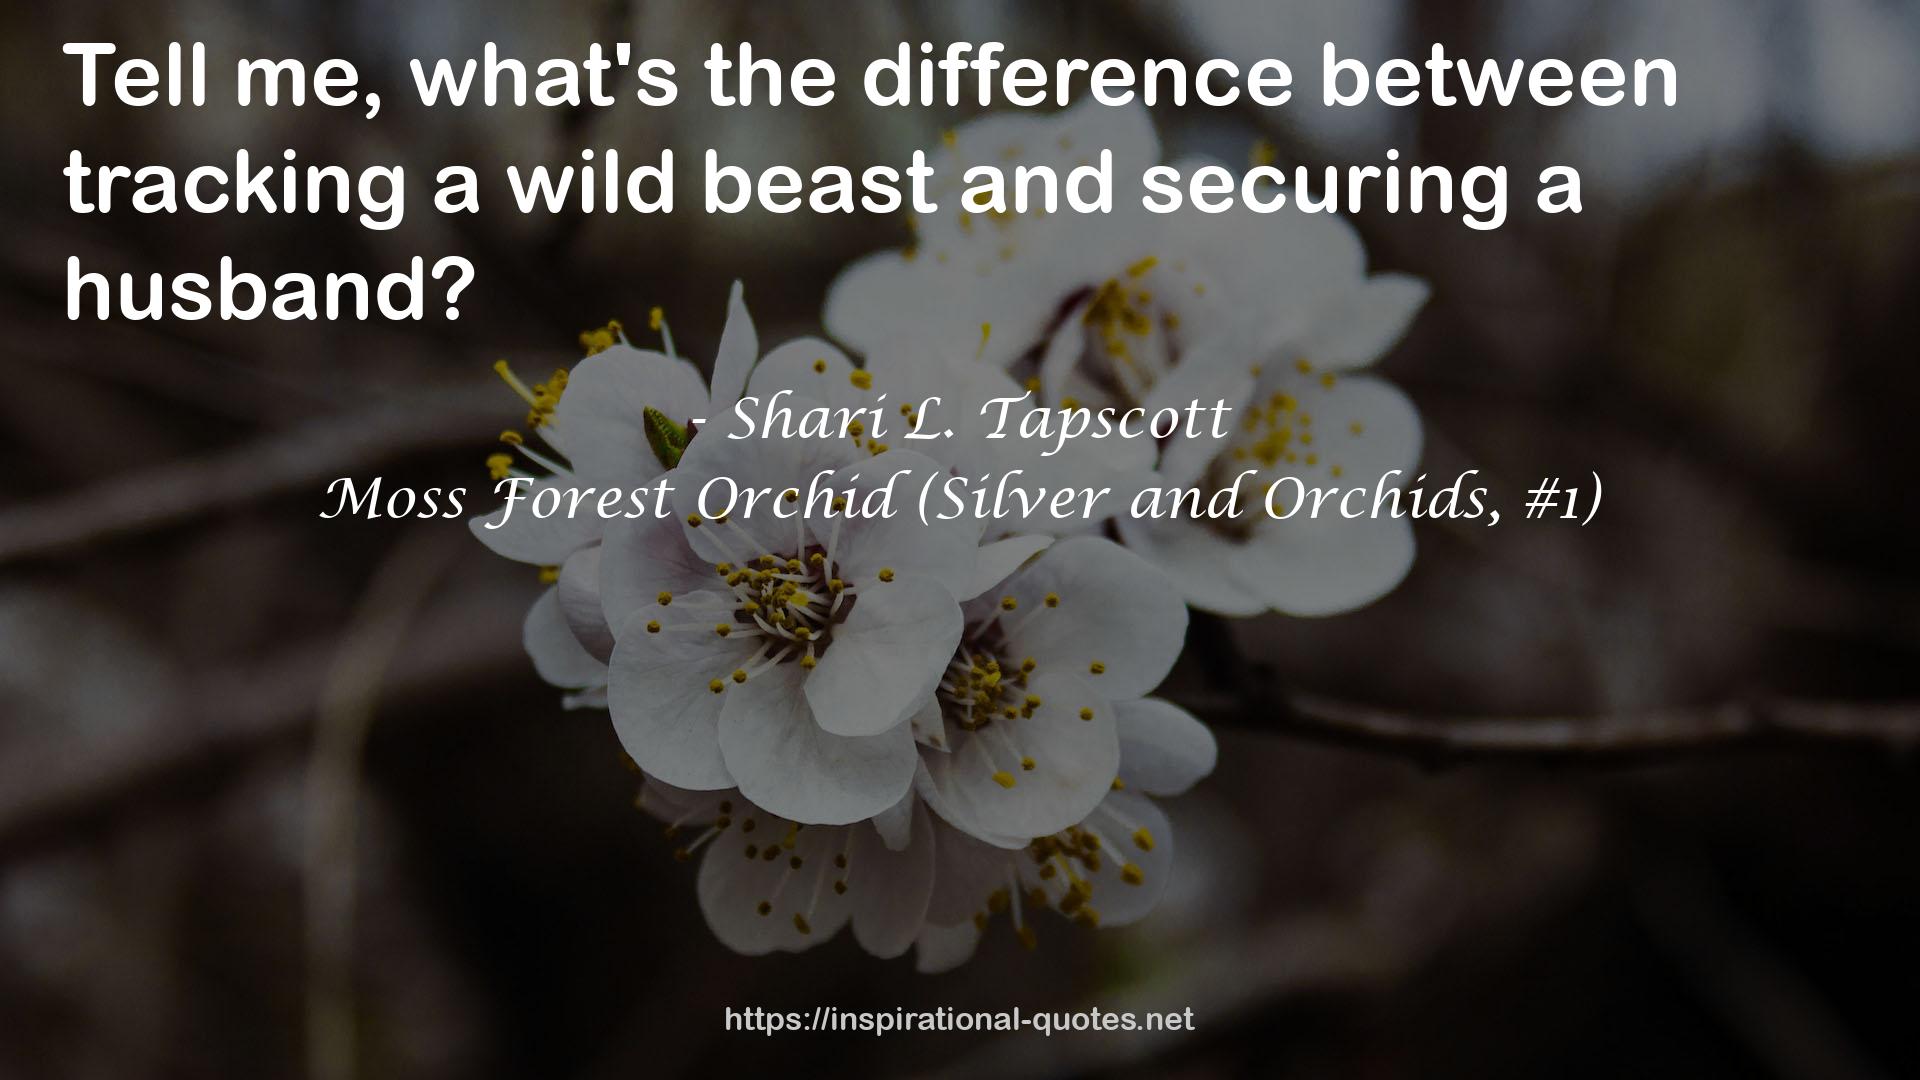 Moss Forest Orchid (Silver and Orchids, #1) QUOTES